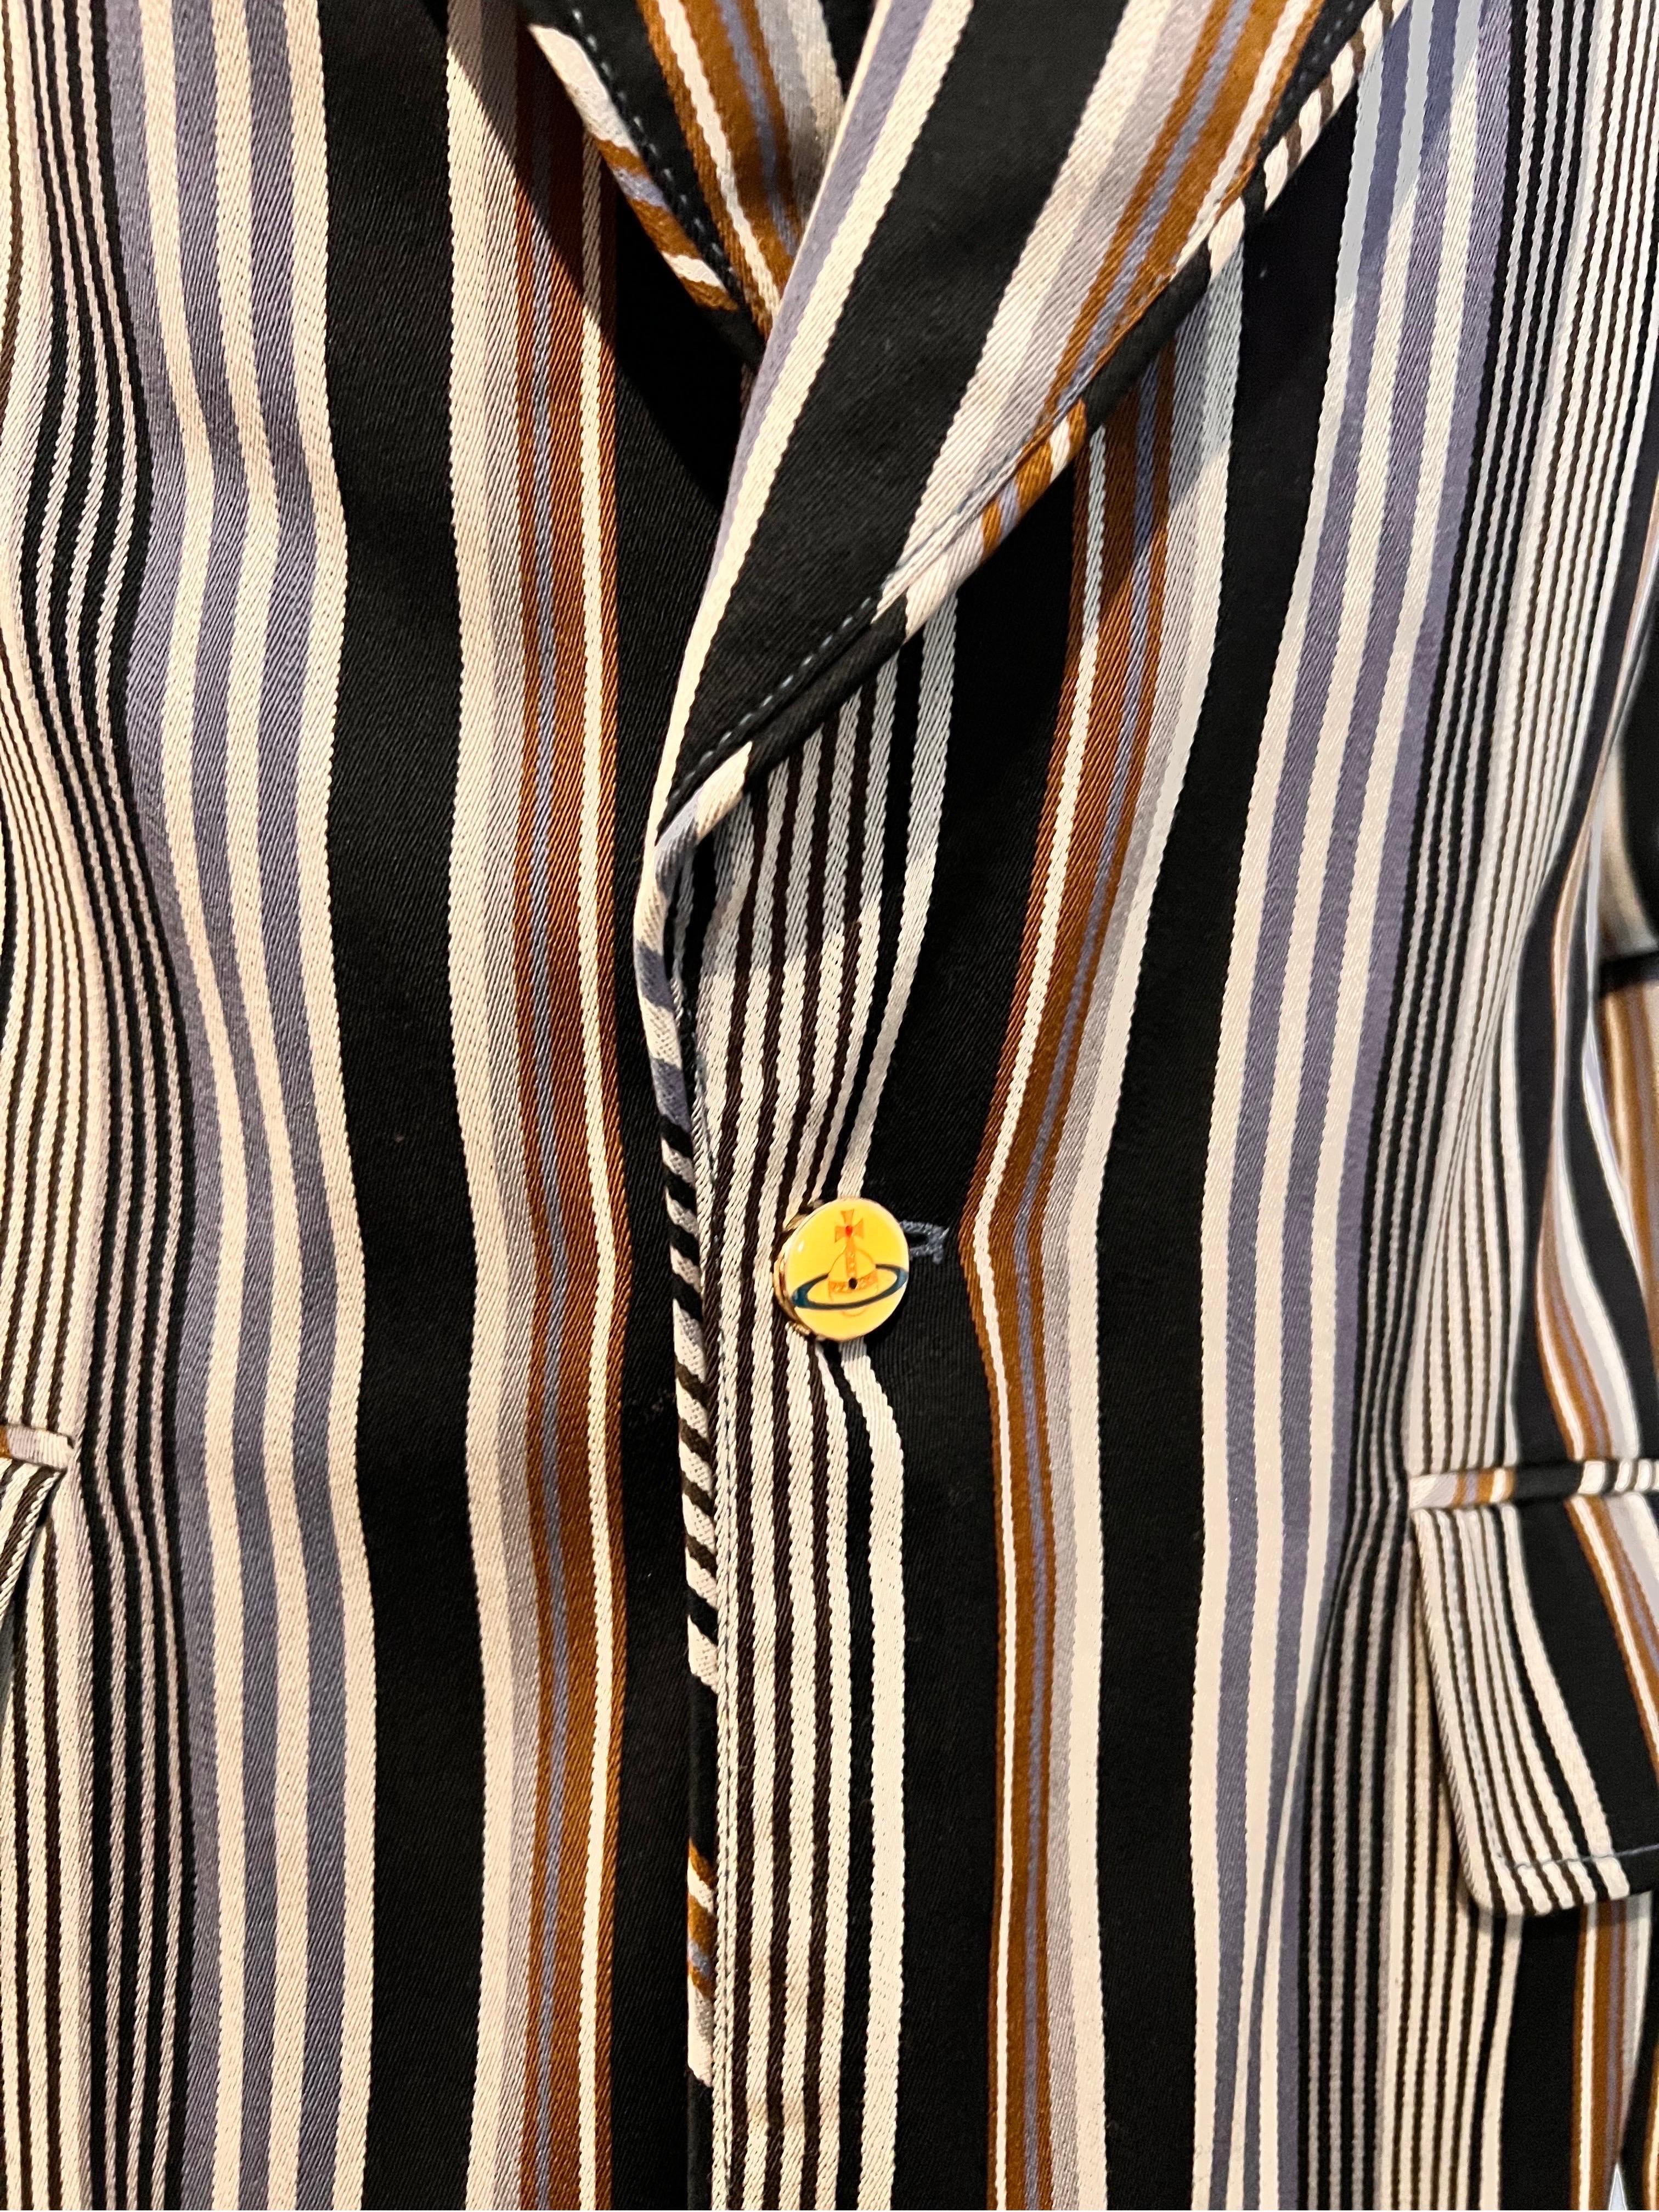 VINTAGE VIVIENNE WESTWOOD Man of London blazer/jacket in wide multi stripe with beautiful piping detail to collar and lapel. 

From the late 1990's era

A special piece of vintage Westwood with unique button detail, cuff link style buttons in the